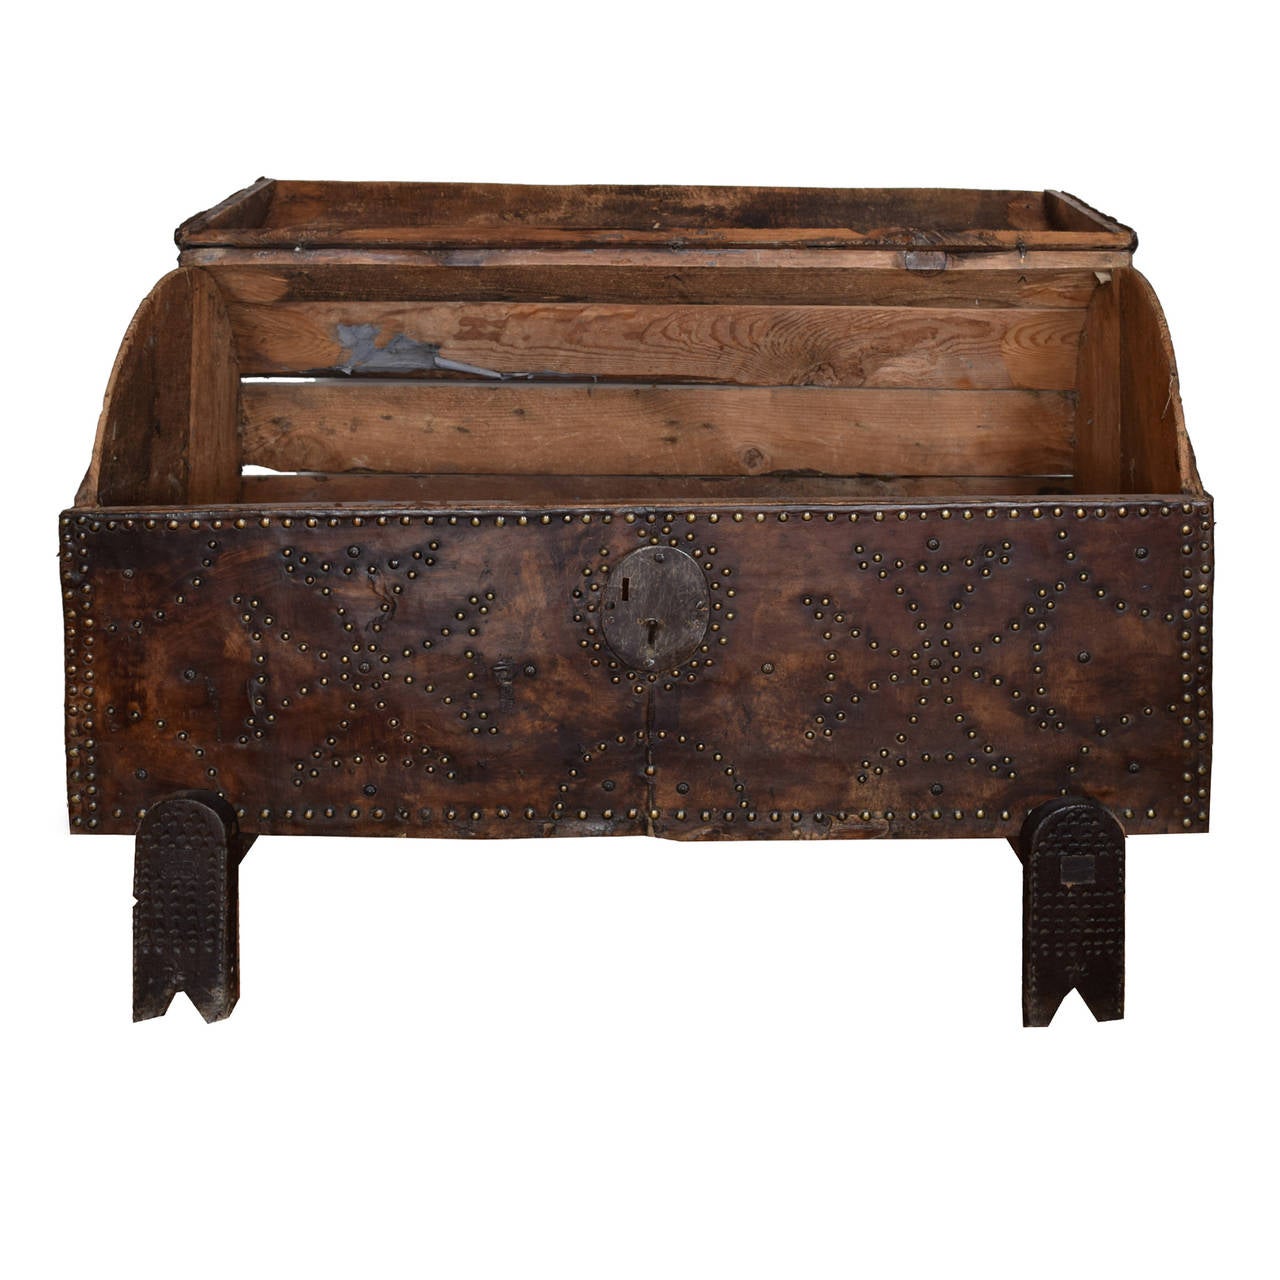 An unbelievable 18th century French trunk on stand with arched top, covered in a perfectly patinated leather with an unusual brass studded Maltese cross pattern, with an iron lock and latch.